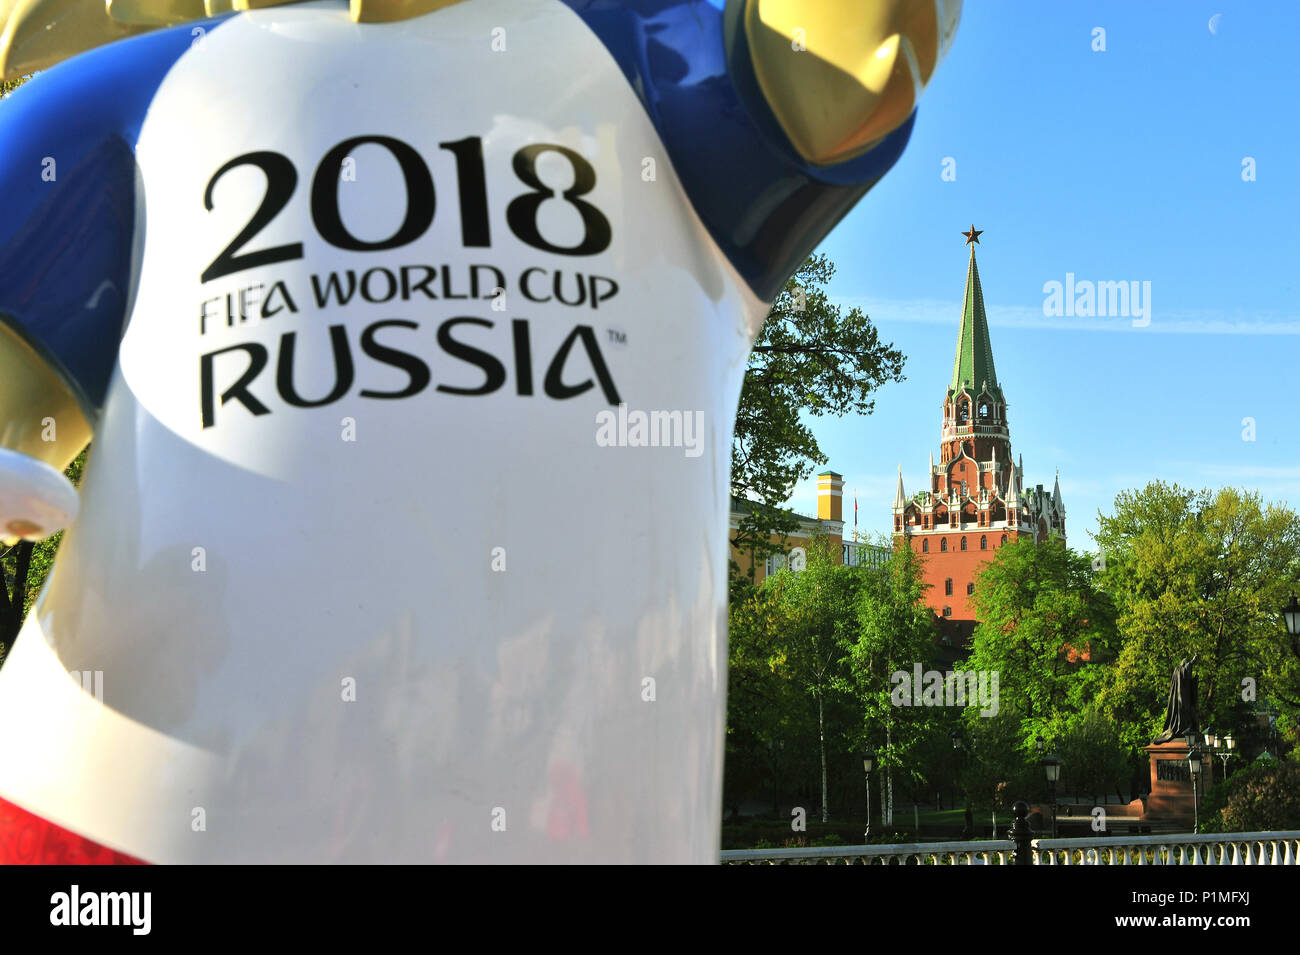 MOSCOW, RUSSIA - MAY 08: Zabivaka, official mascot of FIFA World Cup Russia 2018 with Kremlin tower on background, Moscow on May 8, 2018. Stock Photo